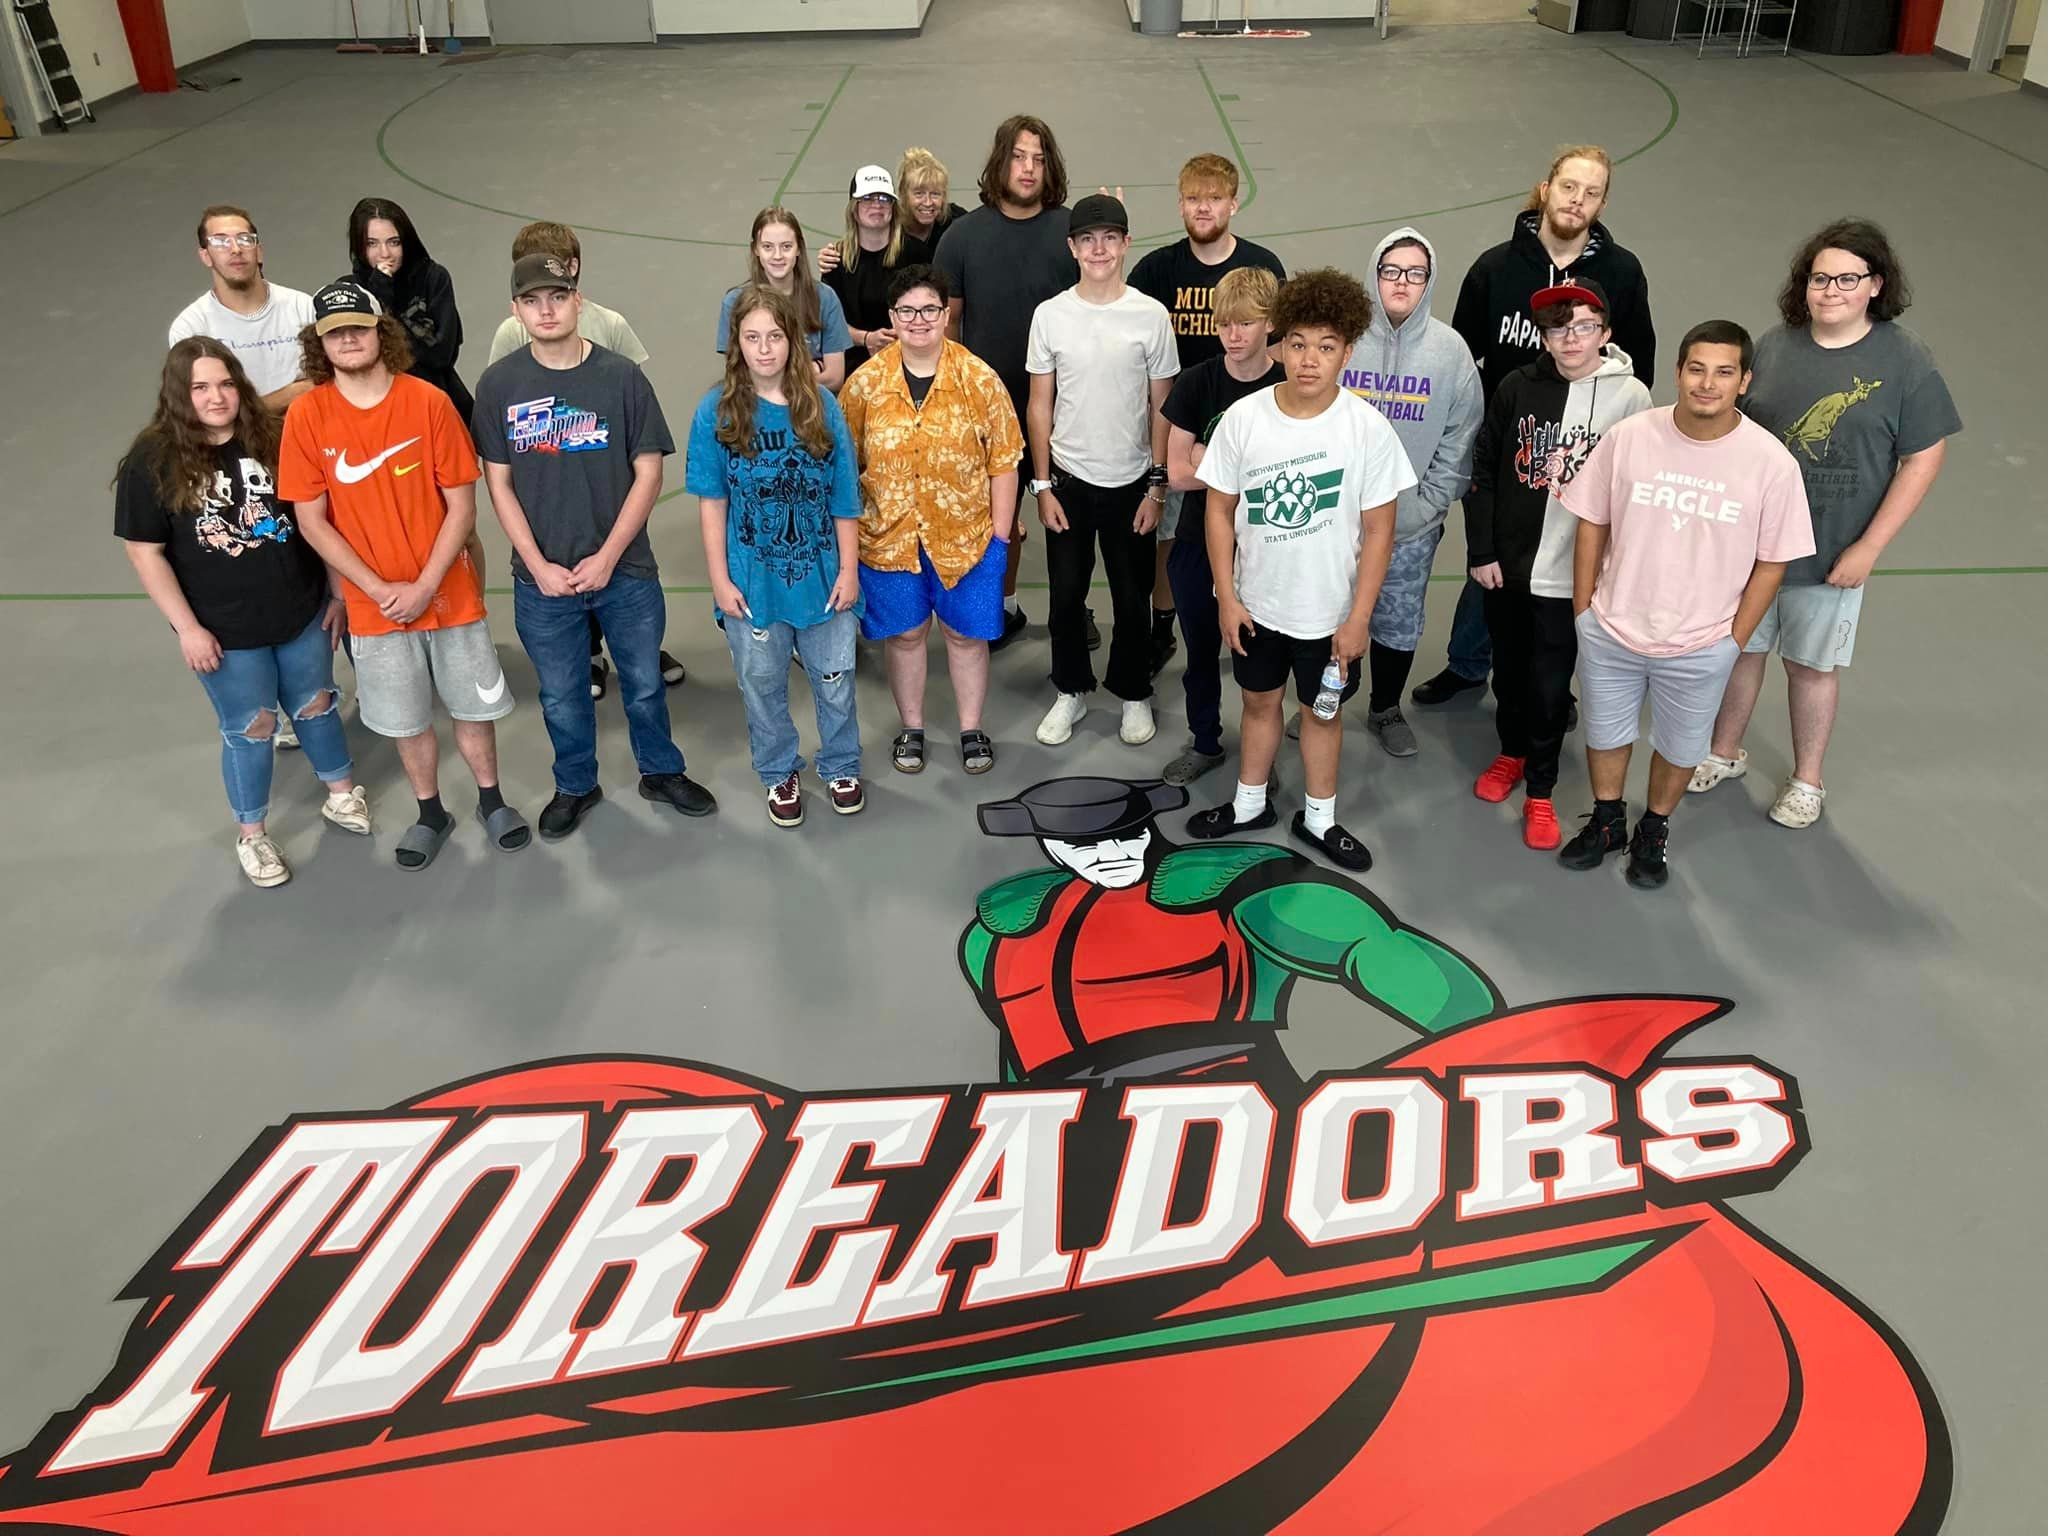 Students standing in a gym above the school toreador logo sign 